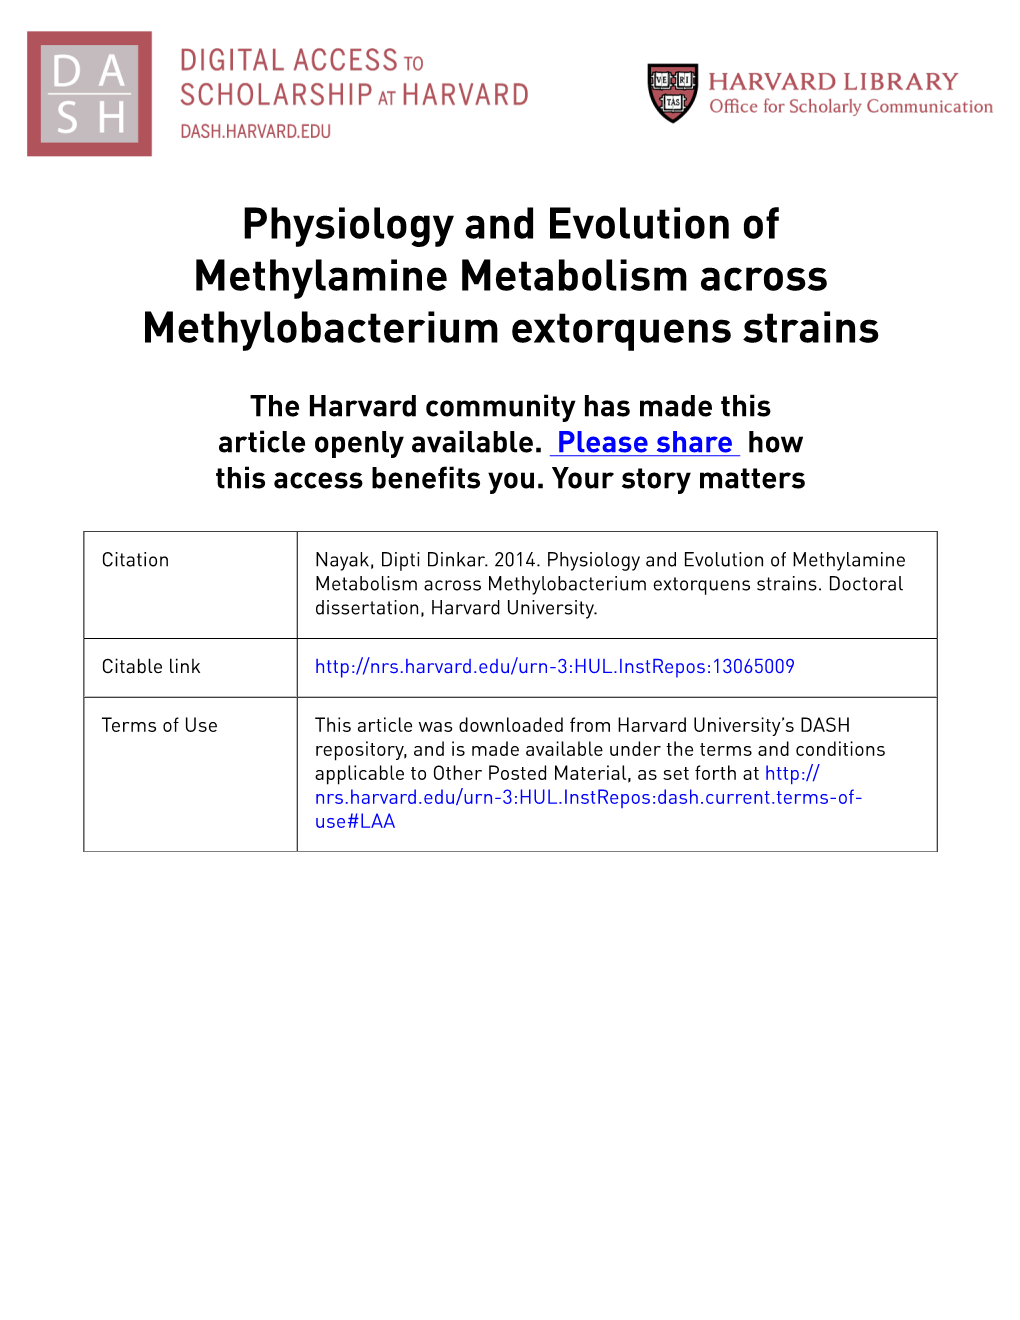 Physiology and Evolution of Methylamine Metabolism Across Methylobacterium Extorquens Strains